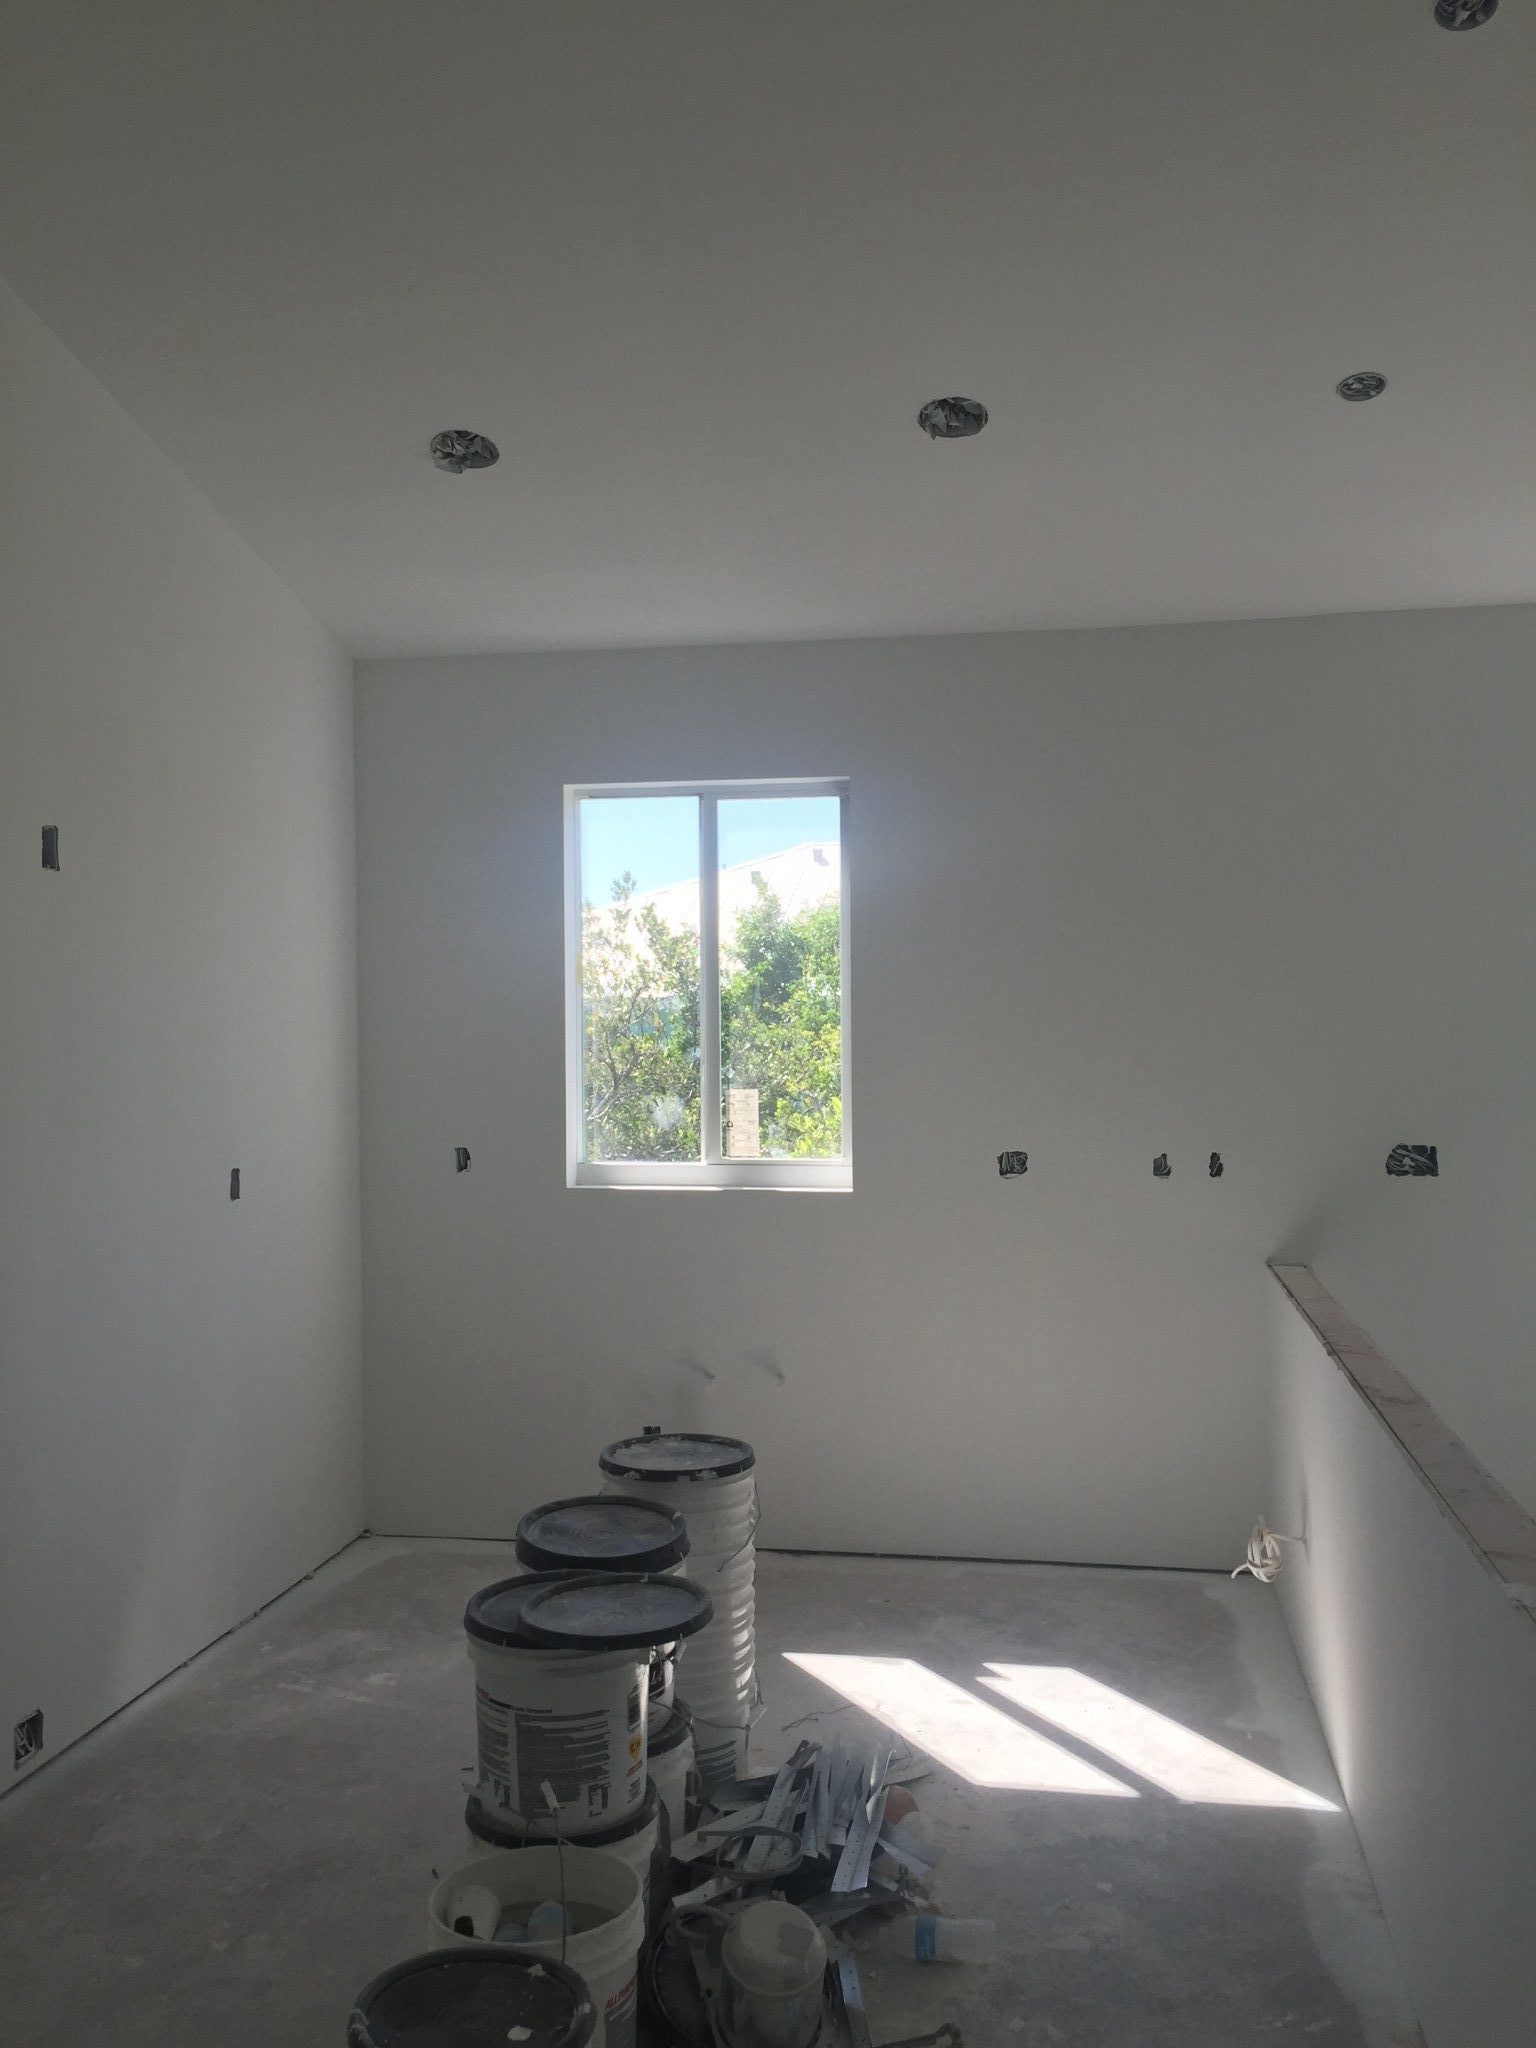 Kitchen progress with drywall, electrical outlets & recessed lighting installed